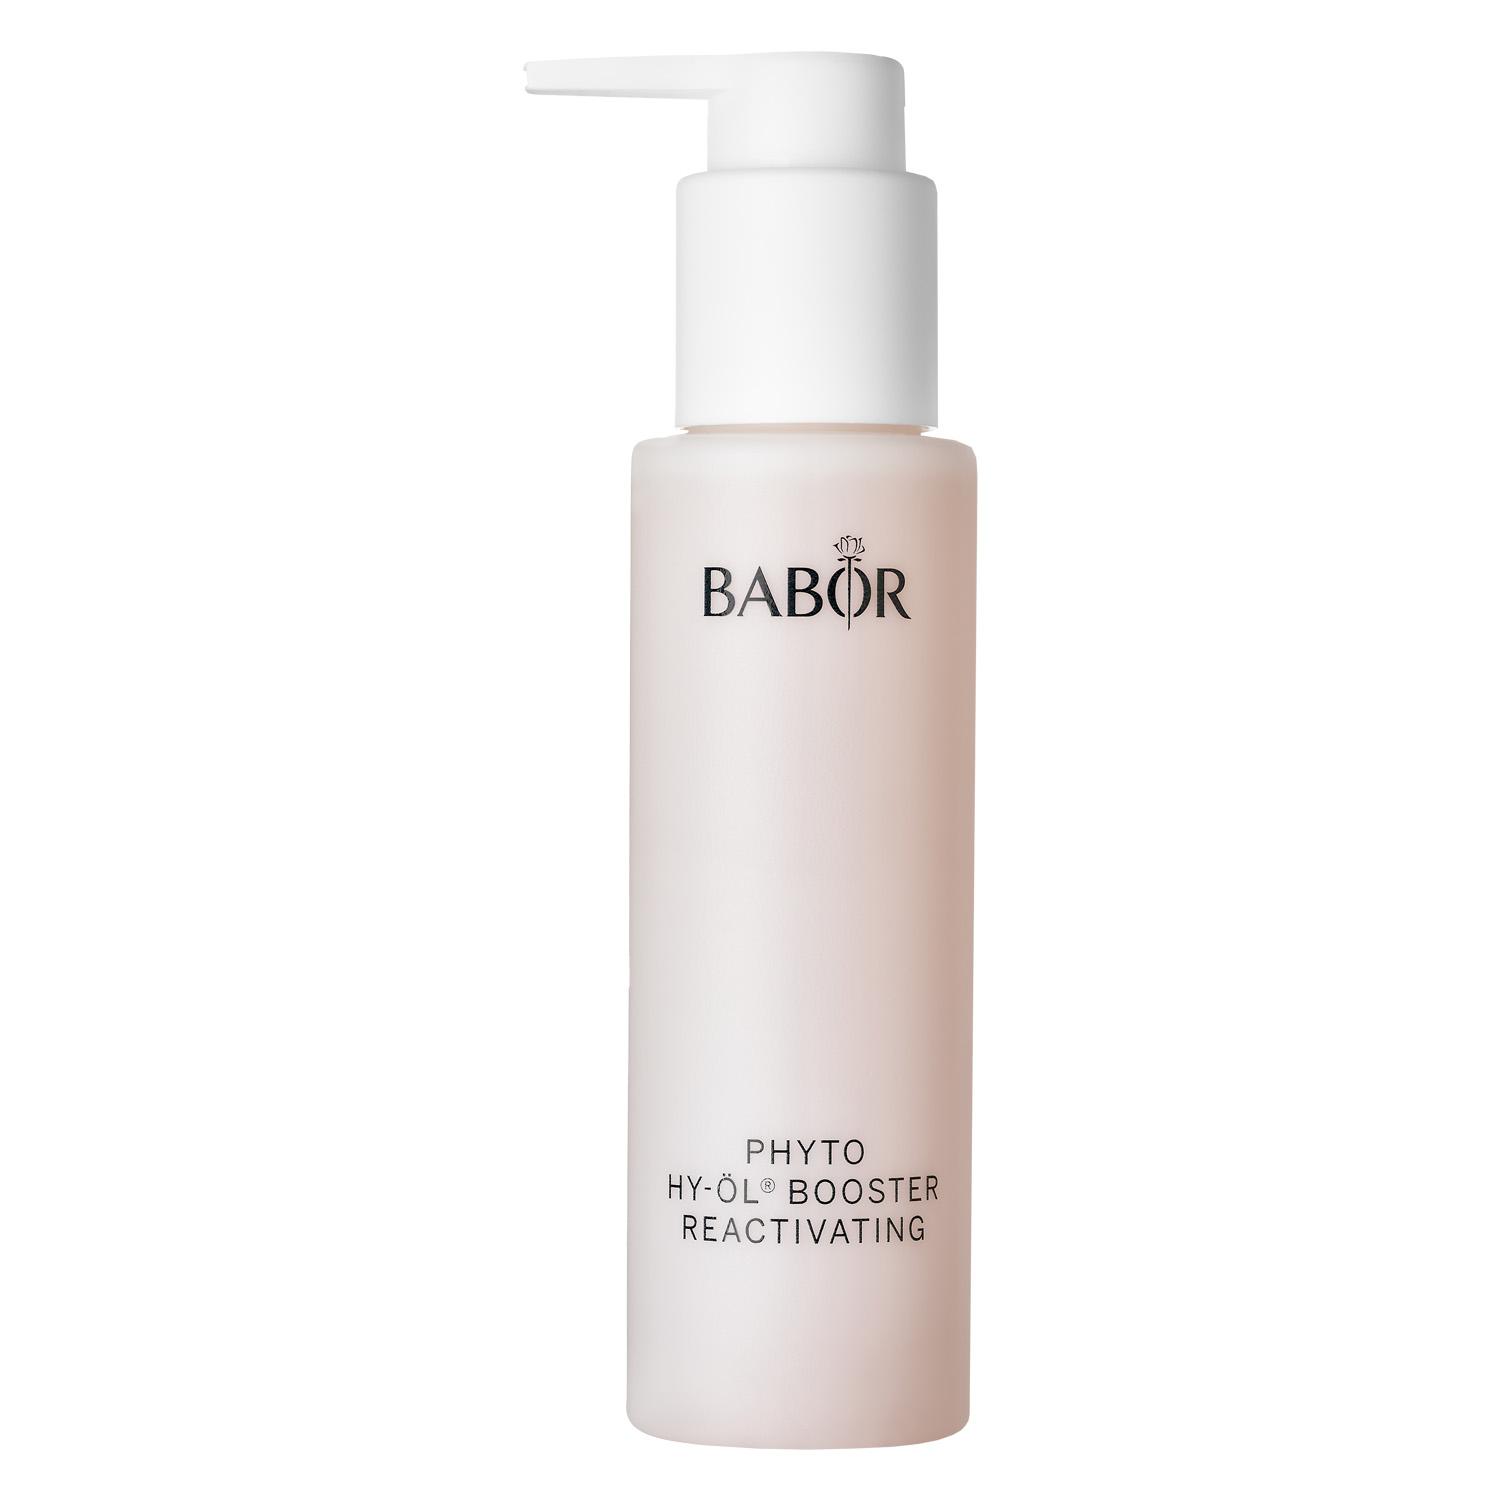 BABOR CLEANSING - Phyto HY-ÖL® Booster Reactivating